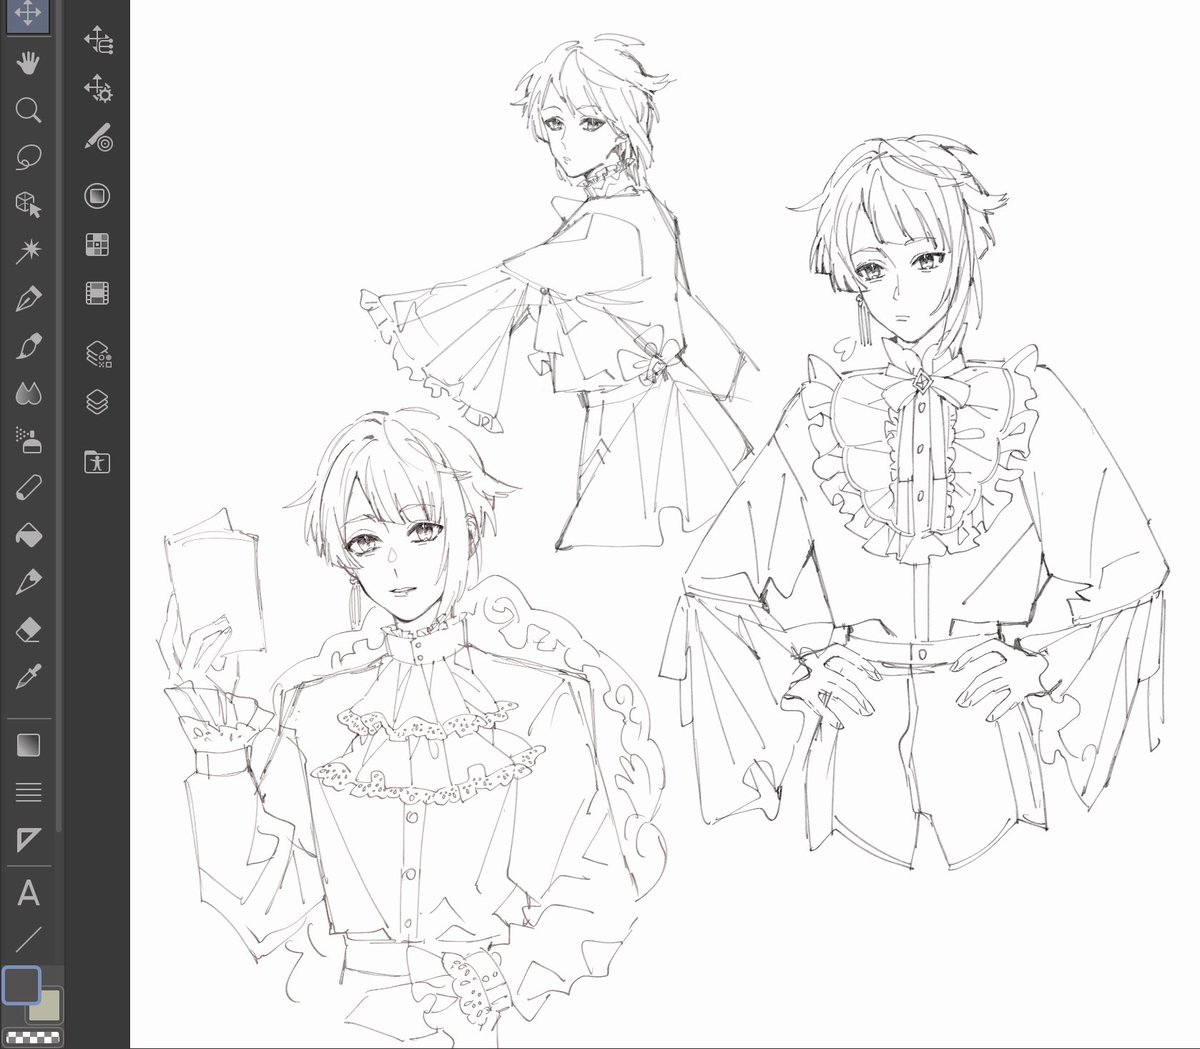 revisited old sketches of xingqiu wearing victorian shirts ? 